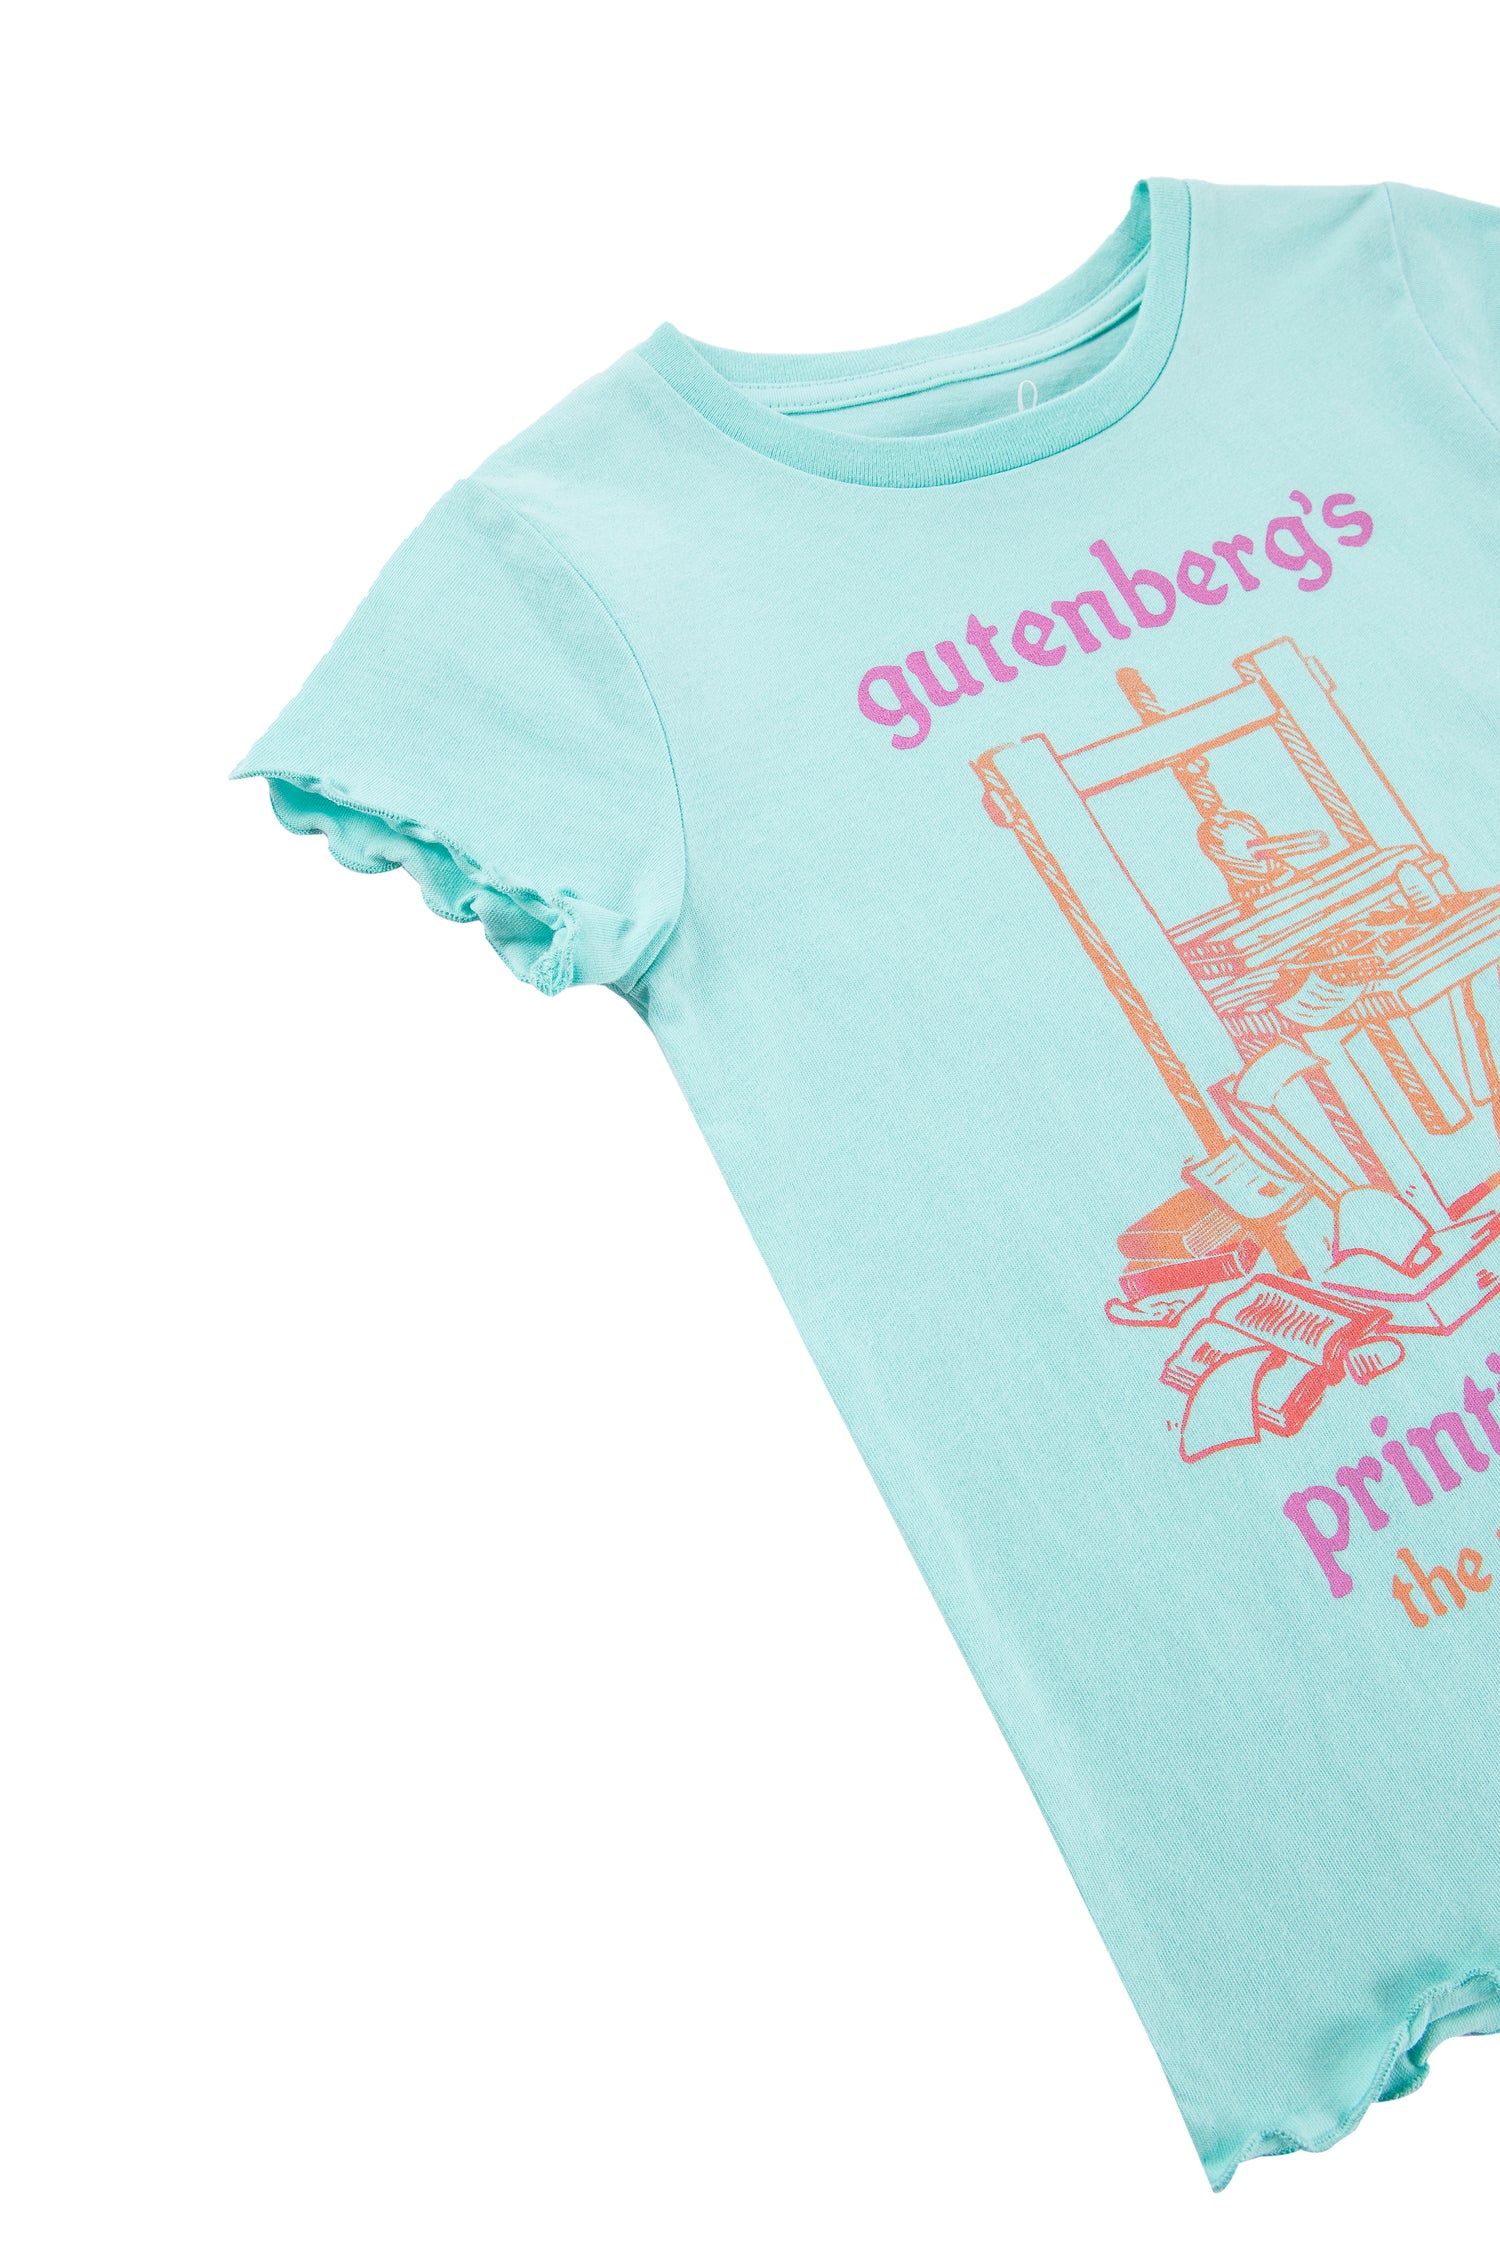 Close up side view of aqua blue tee shirt with ruffled short sleeves, graphic of printing press, and text on front